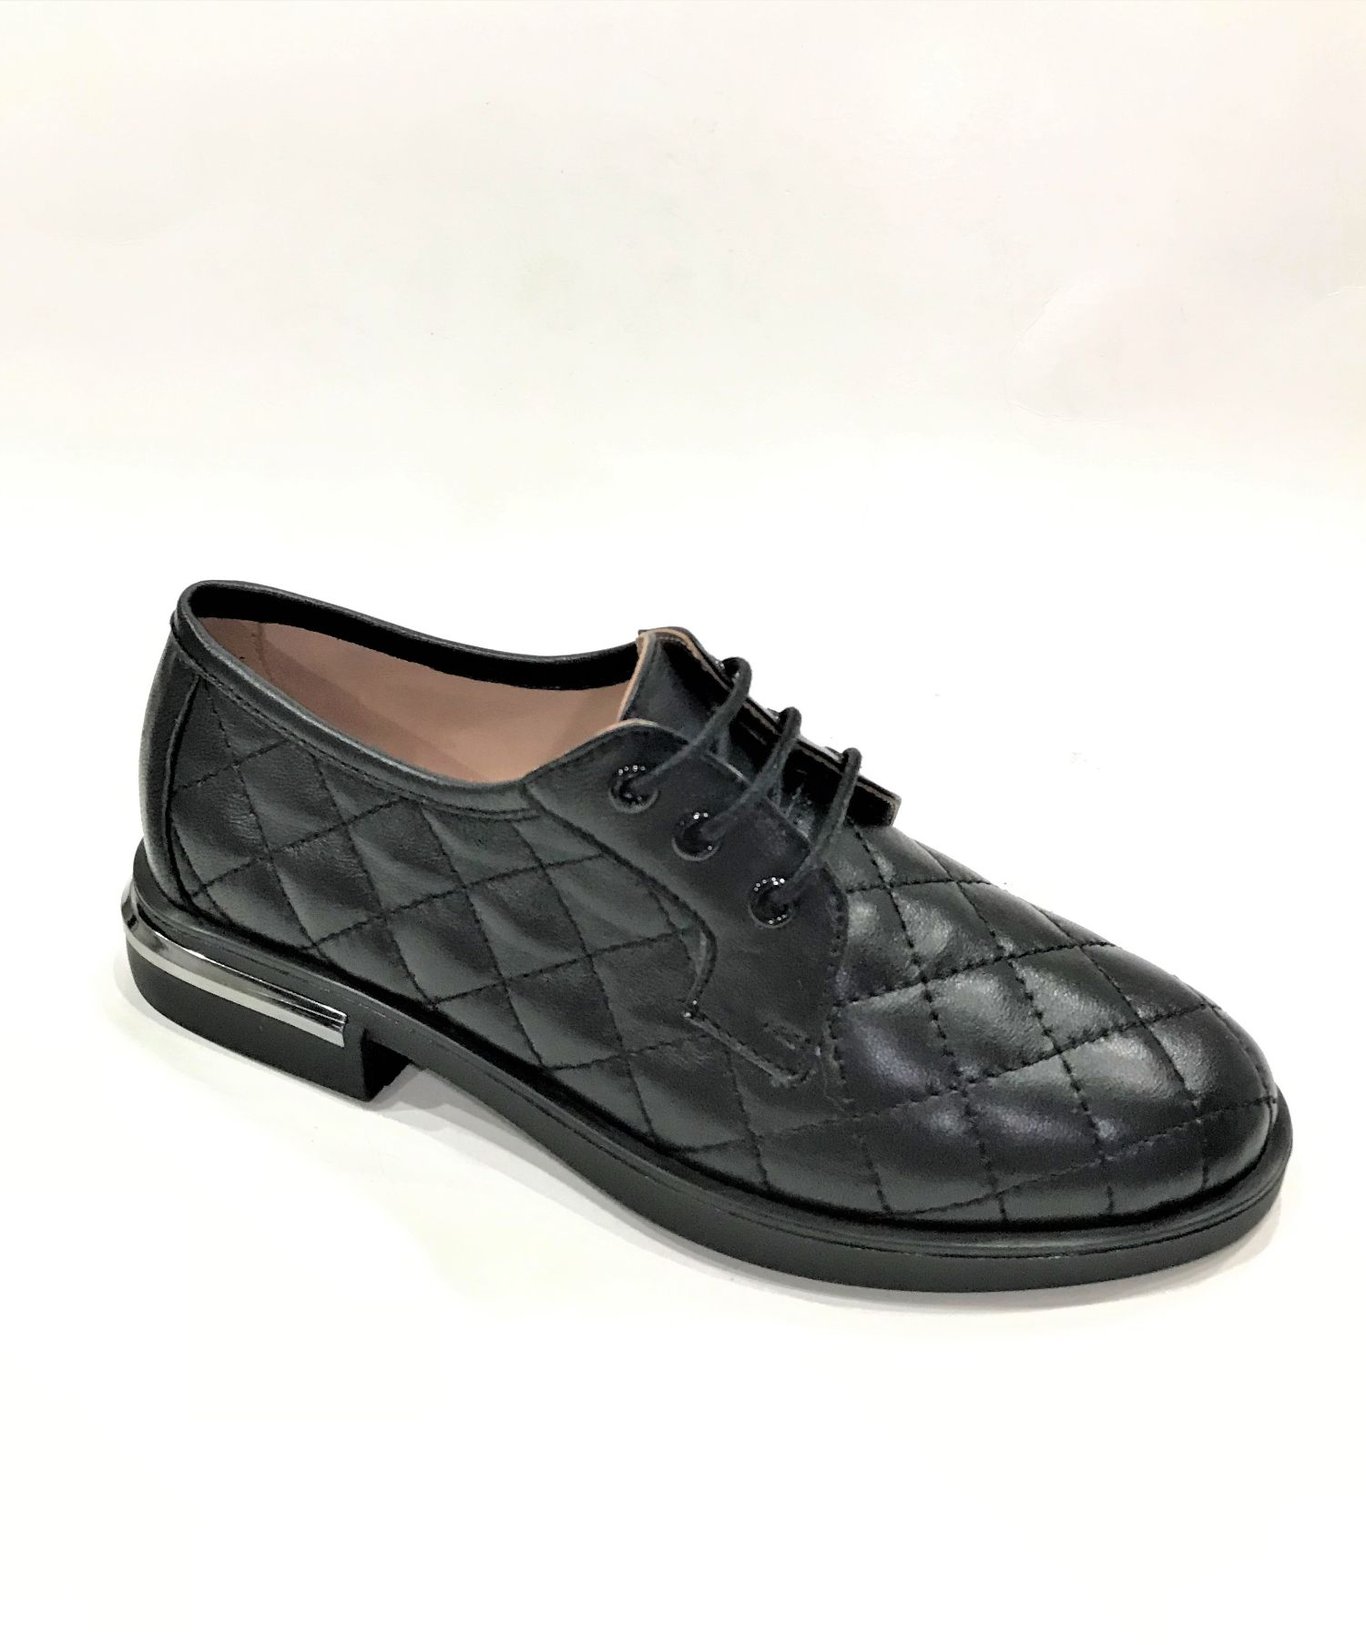 women shoes with black quilted leather on ready sole